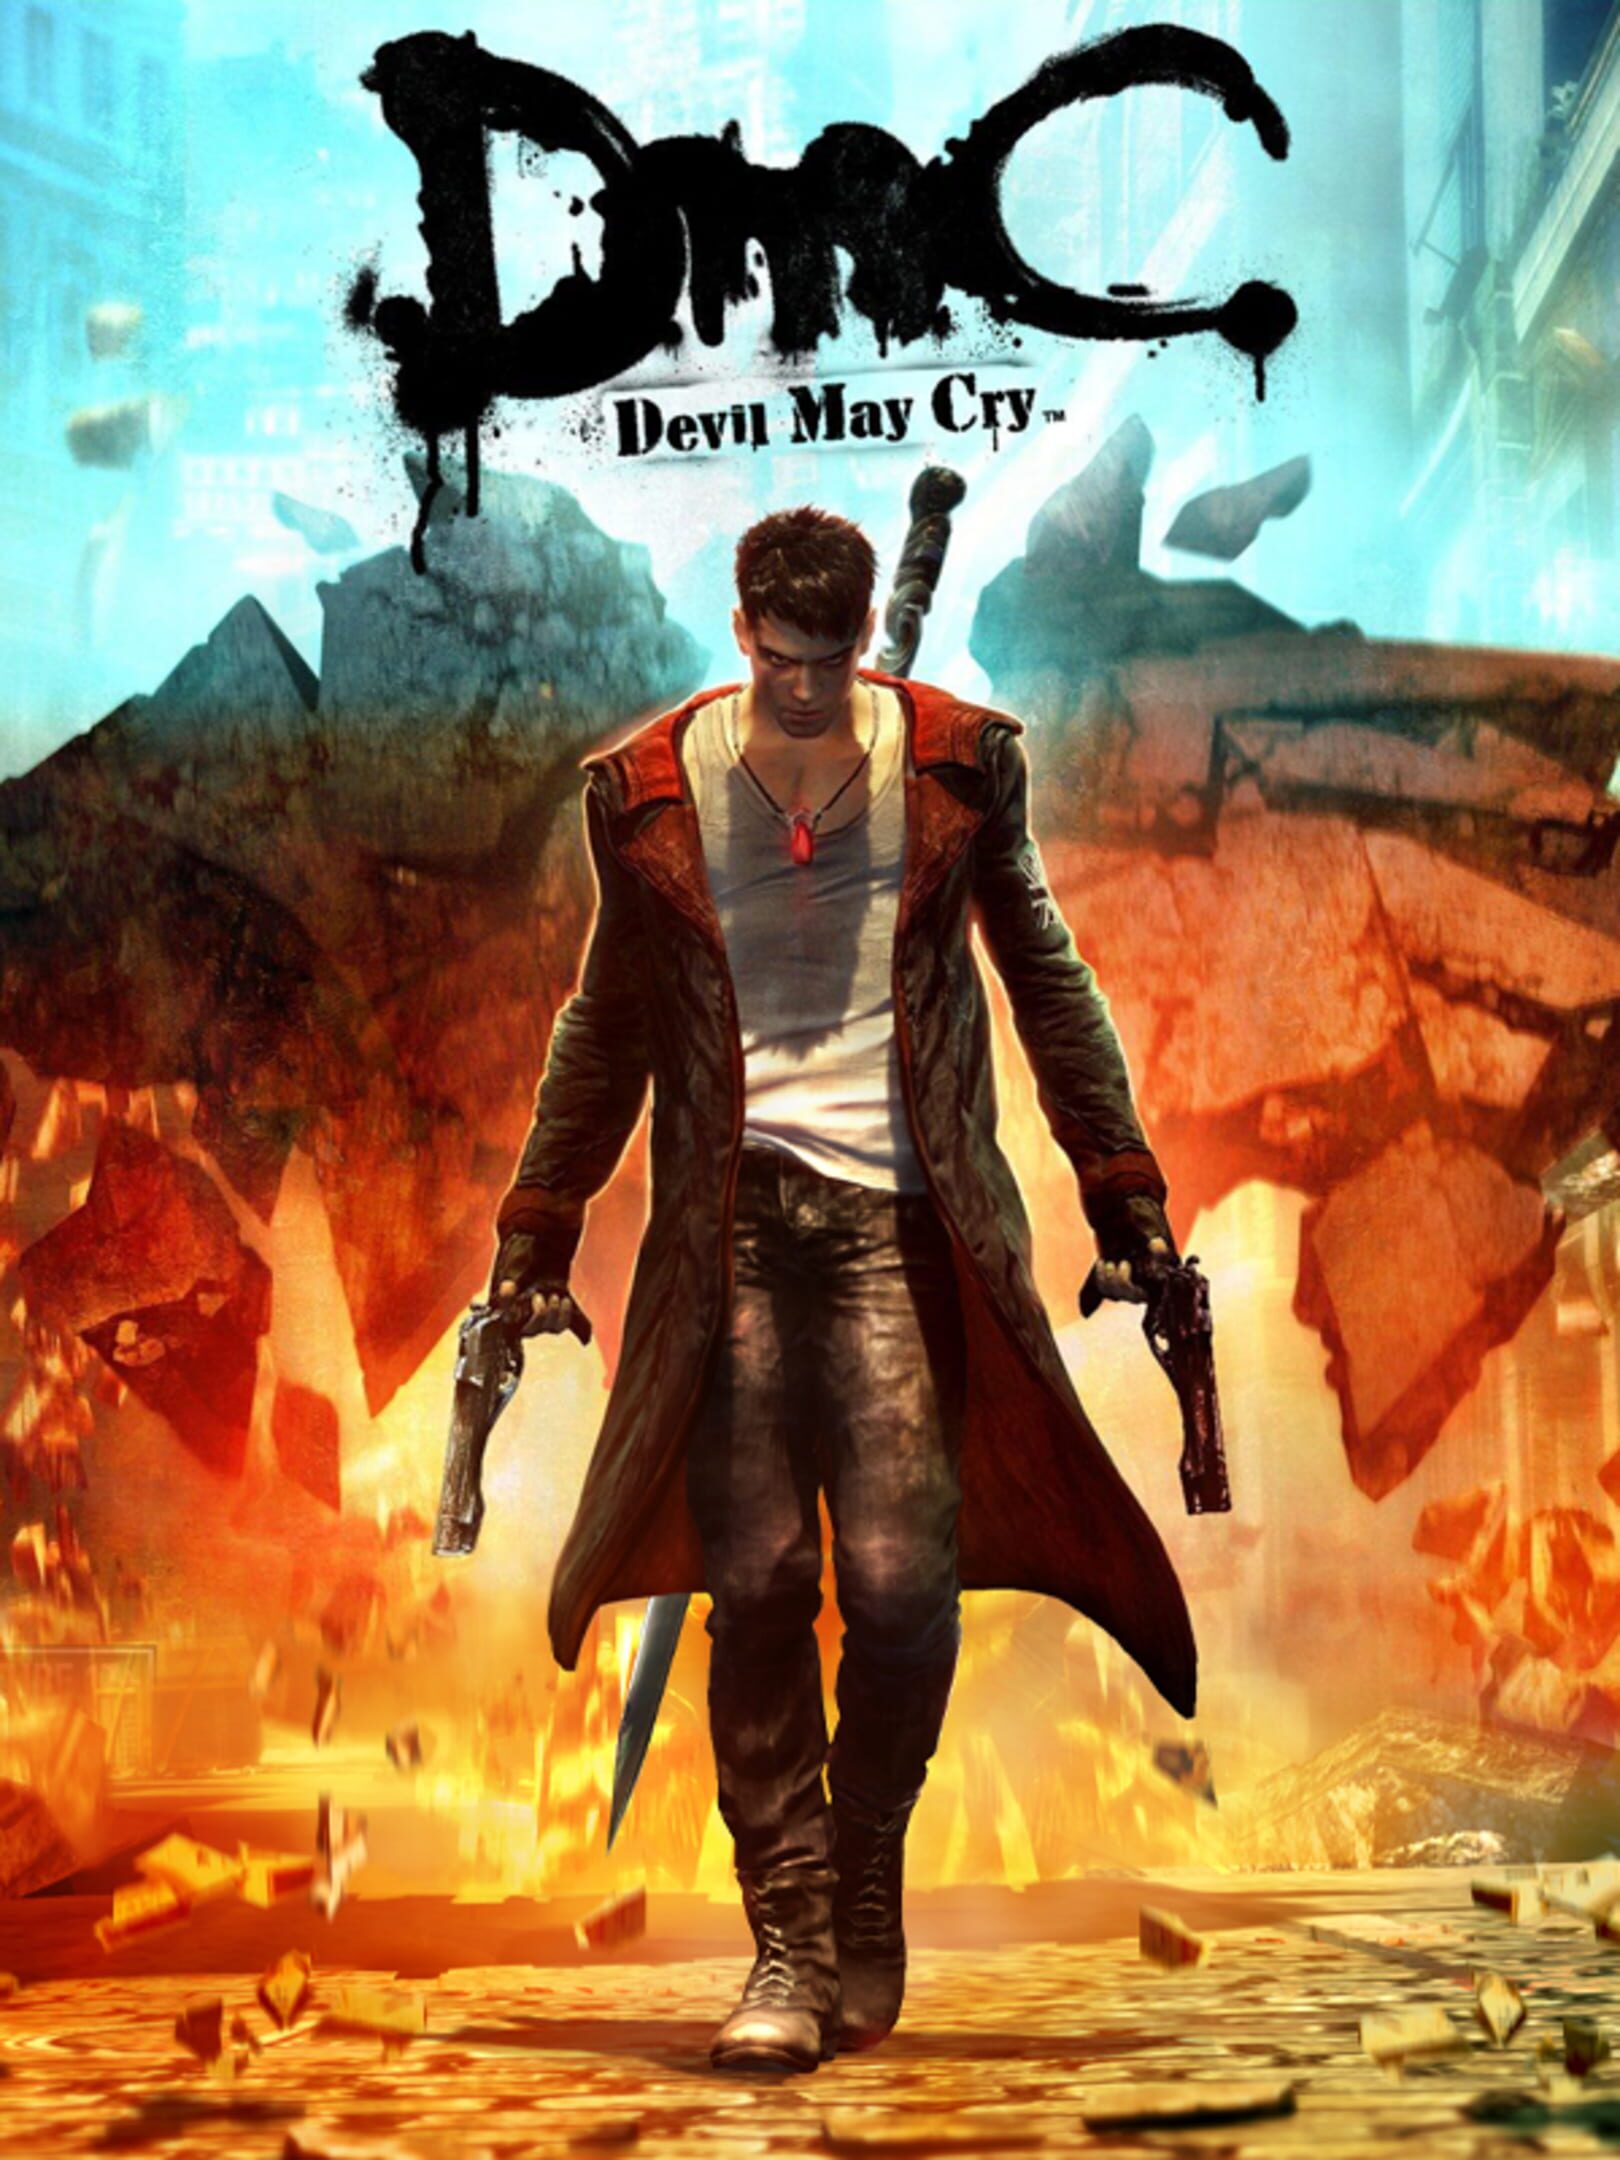 Devil May Cry 5 Developers Proud of DmC but Will Borrow More